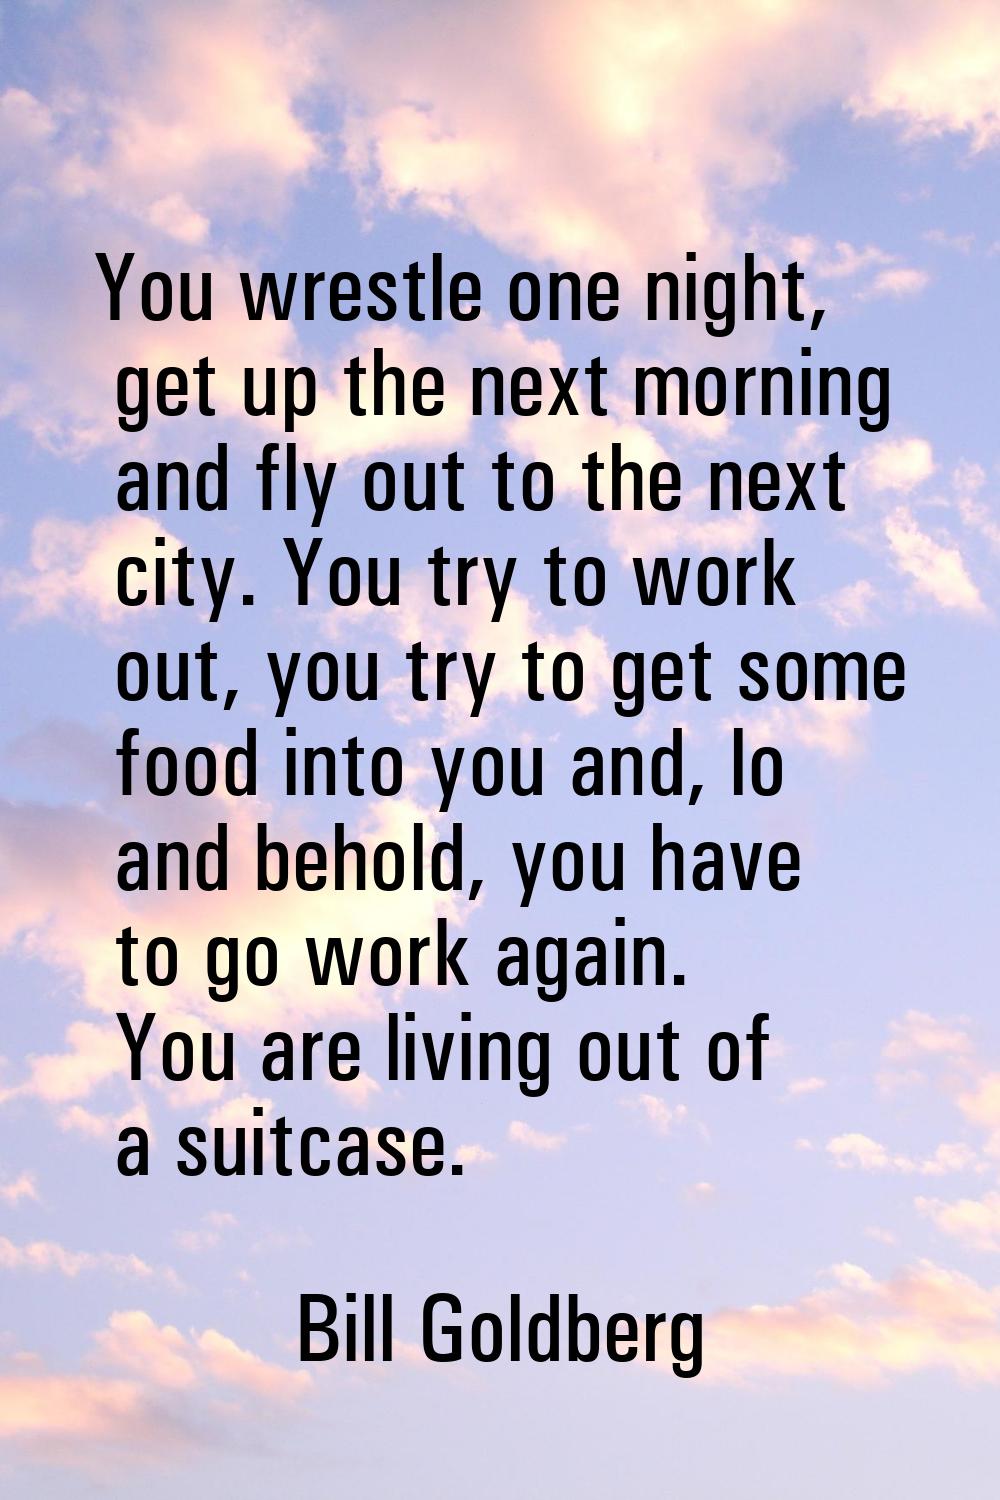 You wrestle one night, get up the next morning and fly out to the next city. You try to work out, y